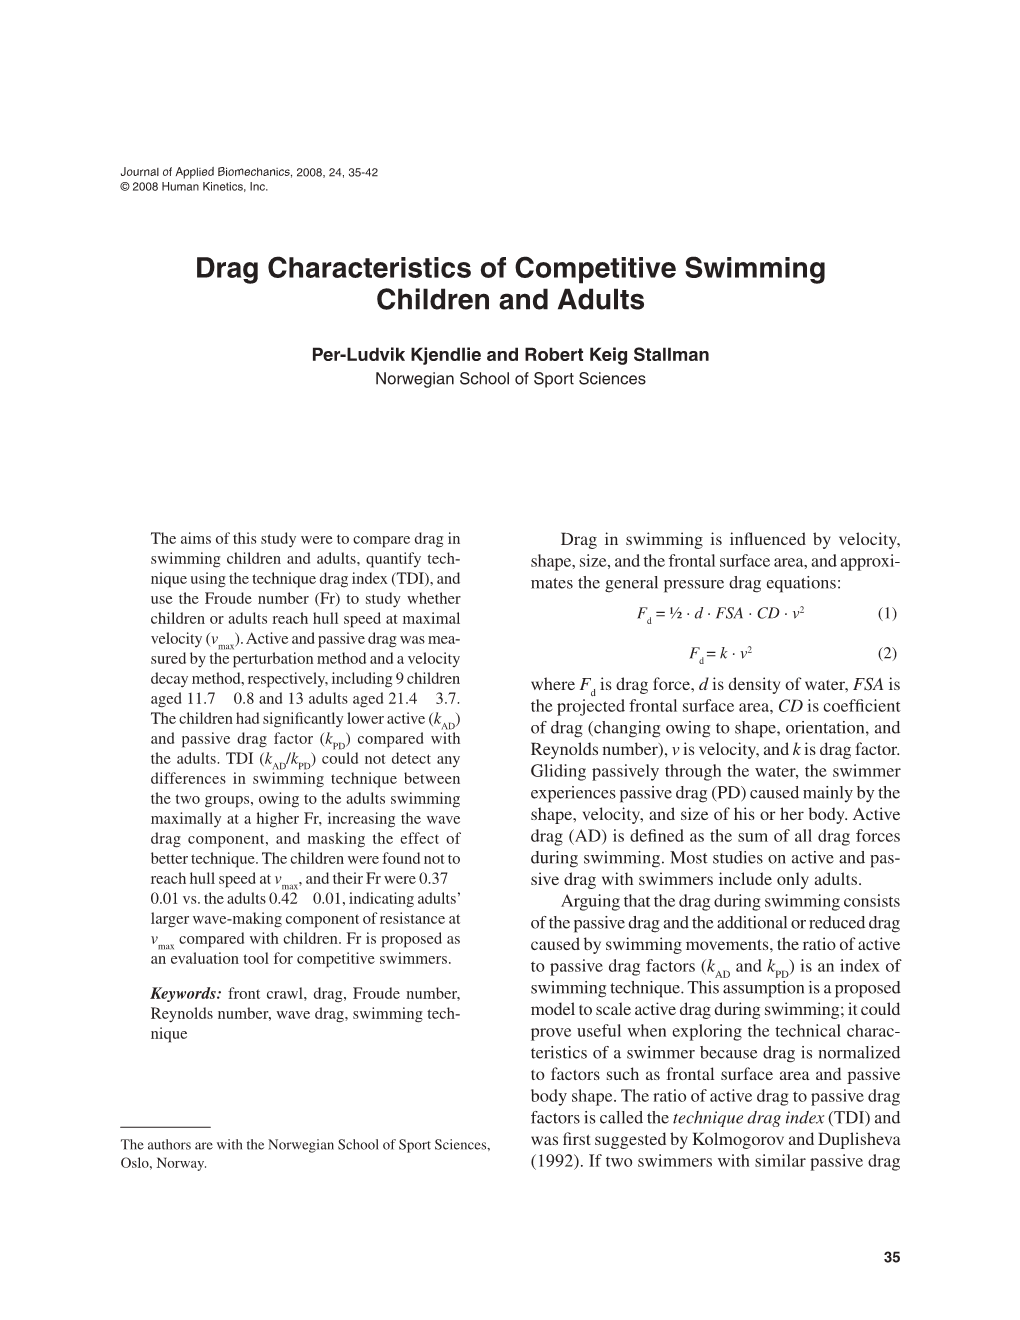 Drag Characteristics of Competitive Swimming Children and Adults